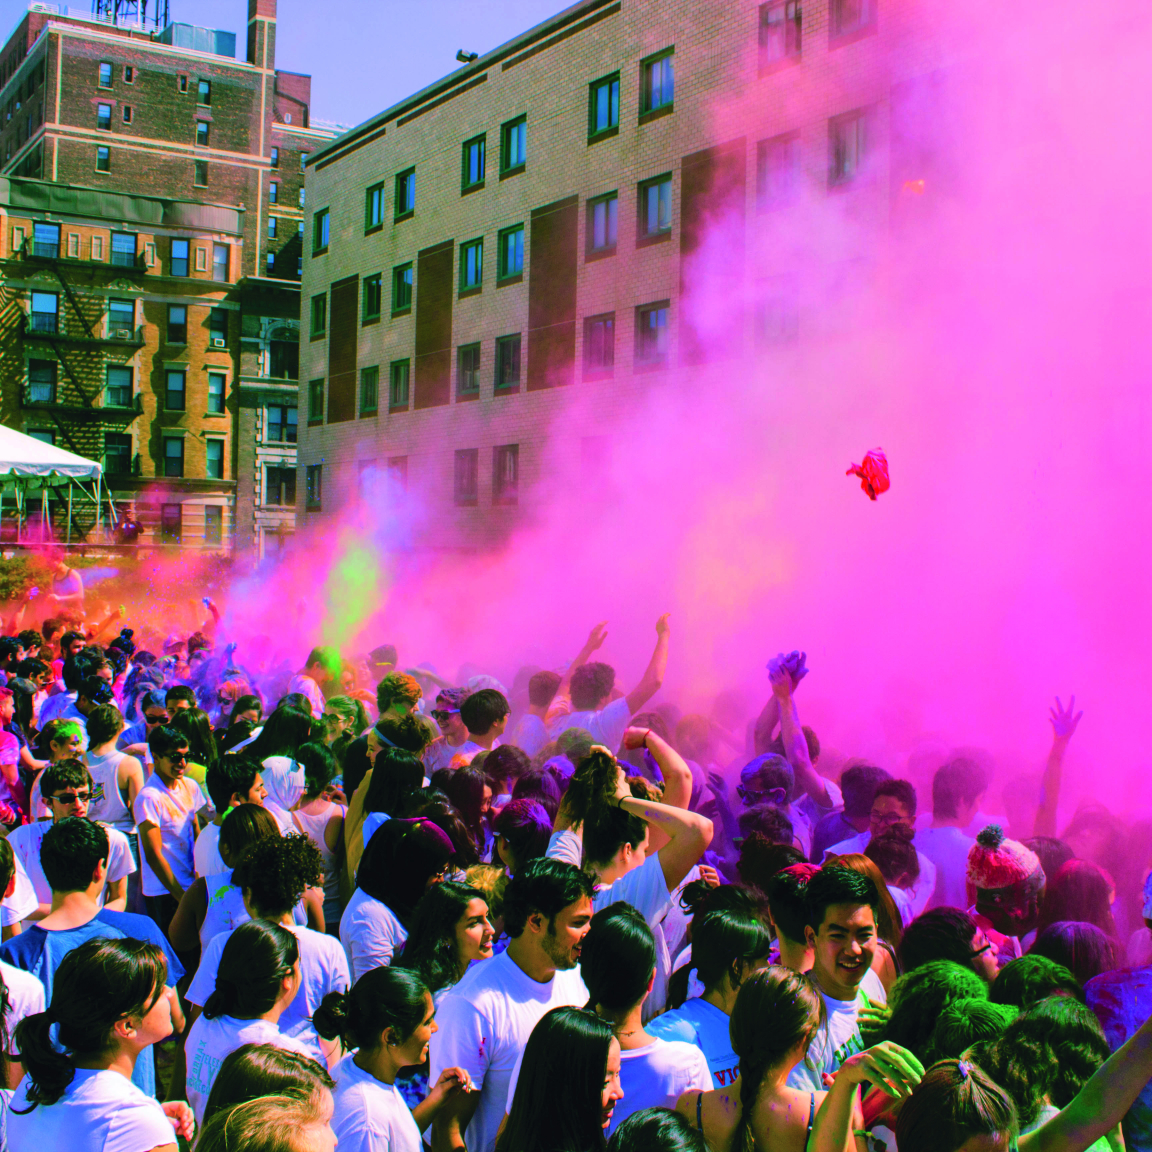 Students celebrating throwing colored powder on campus